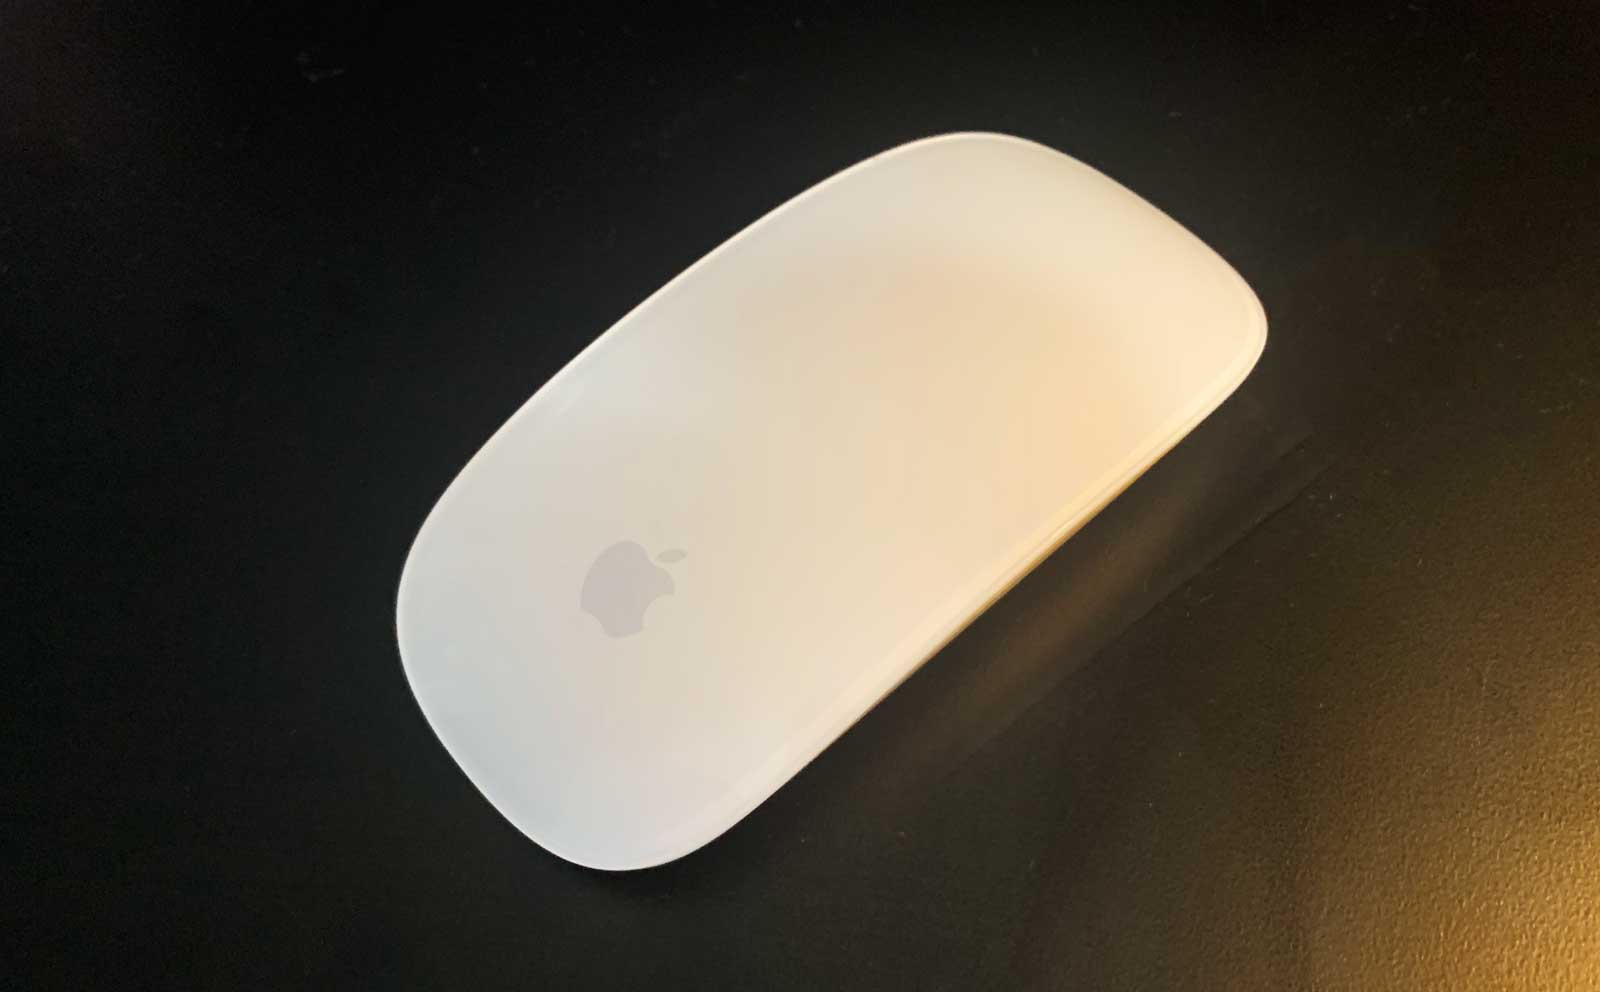 How long do batteries last on a Magic Mouse 1?